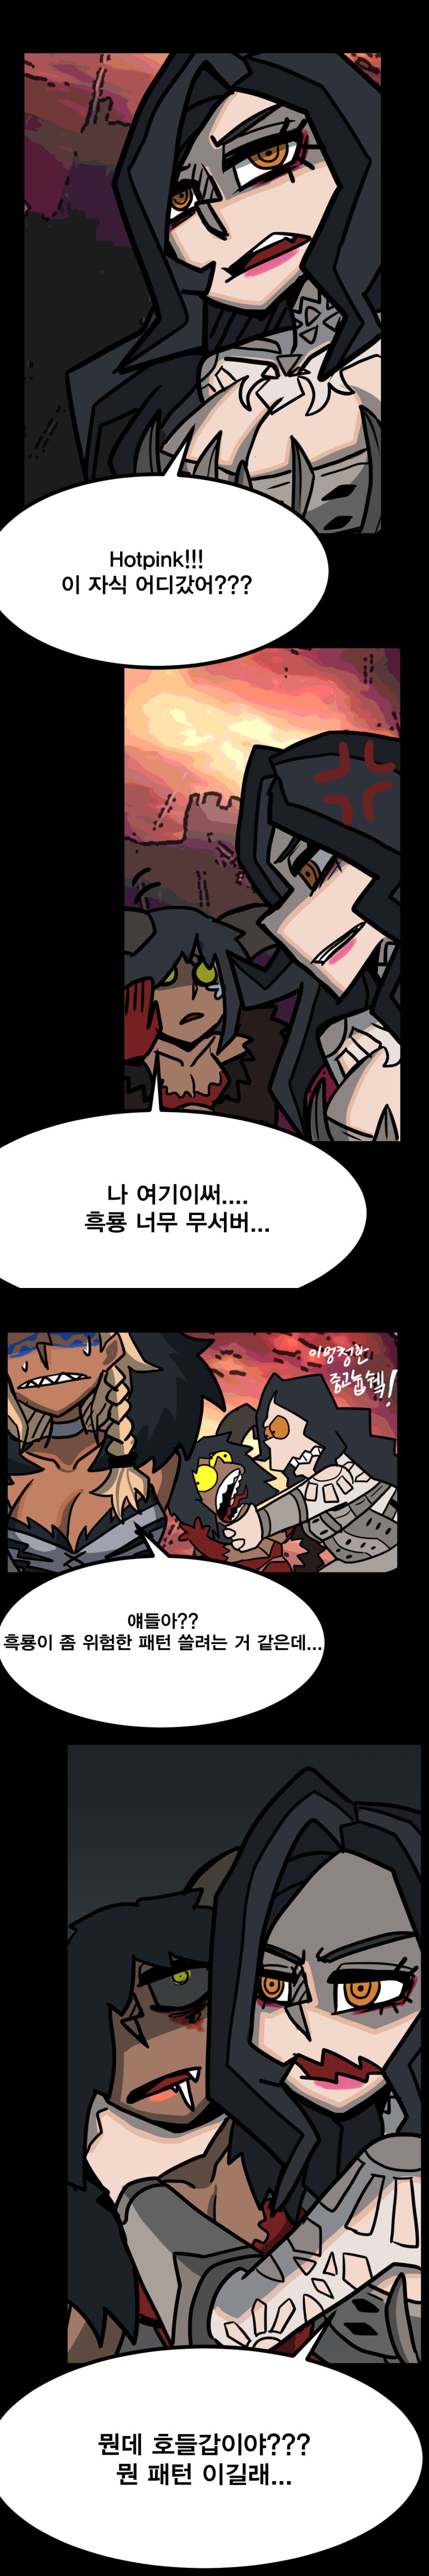 mh2-8완성.png